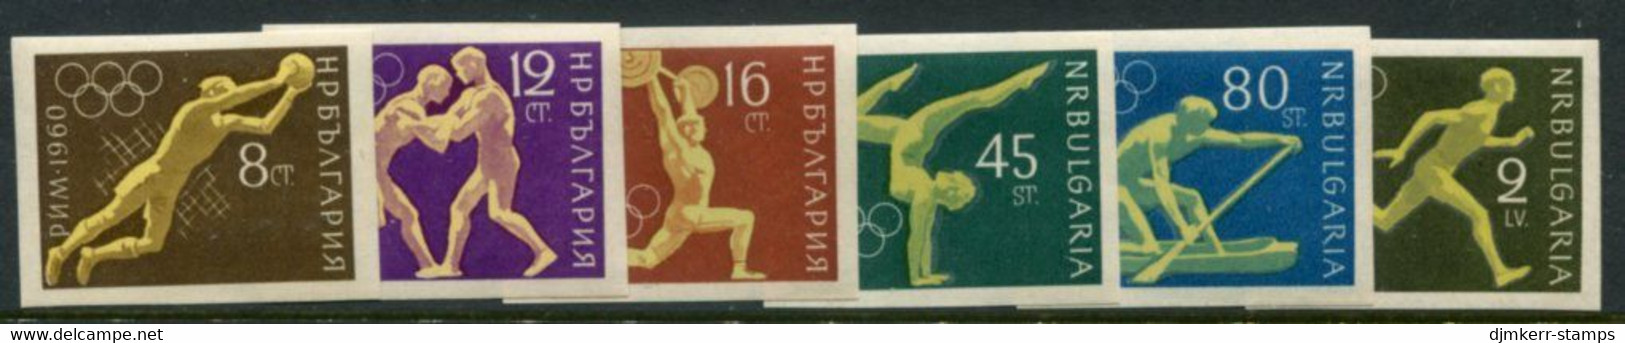 BULGARIA 1960 Olympic Games Imperforate MNH / **.  Michel 1178-83 - Ungebraucht